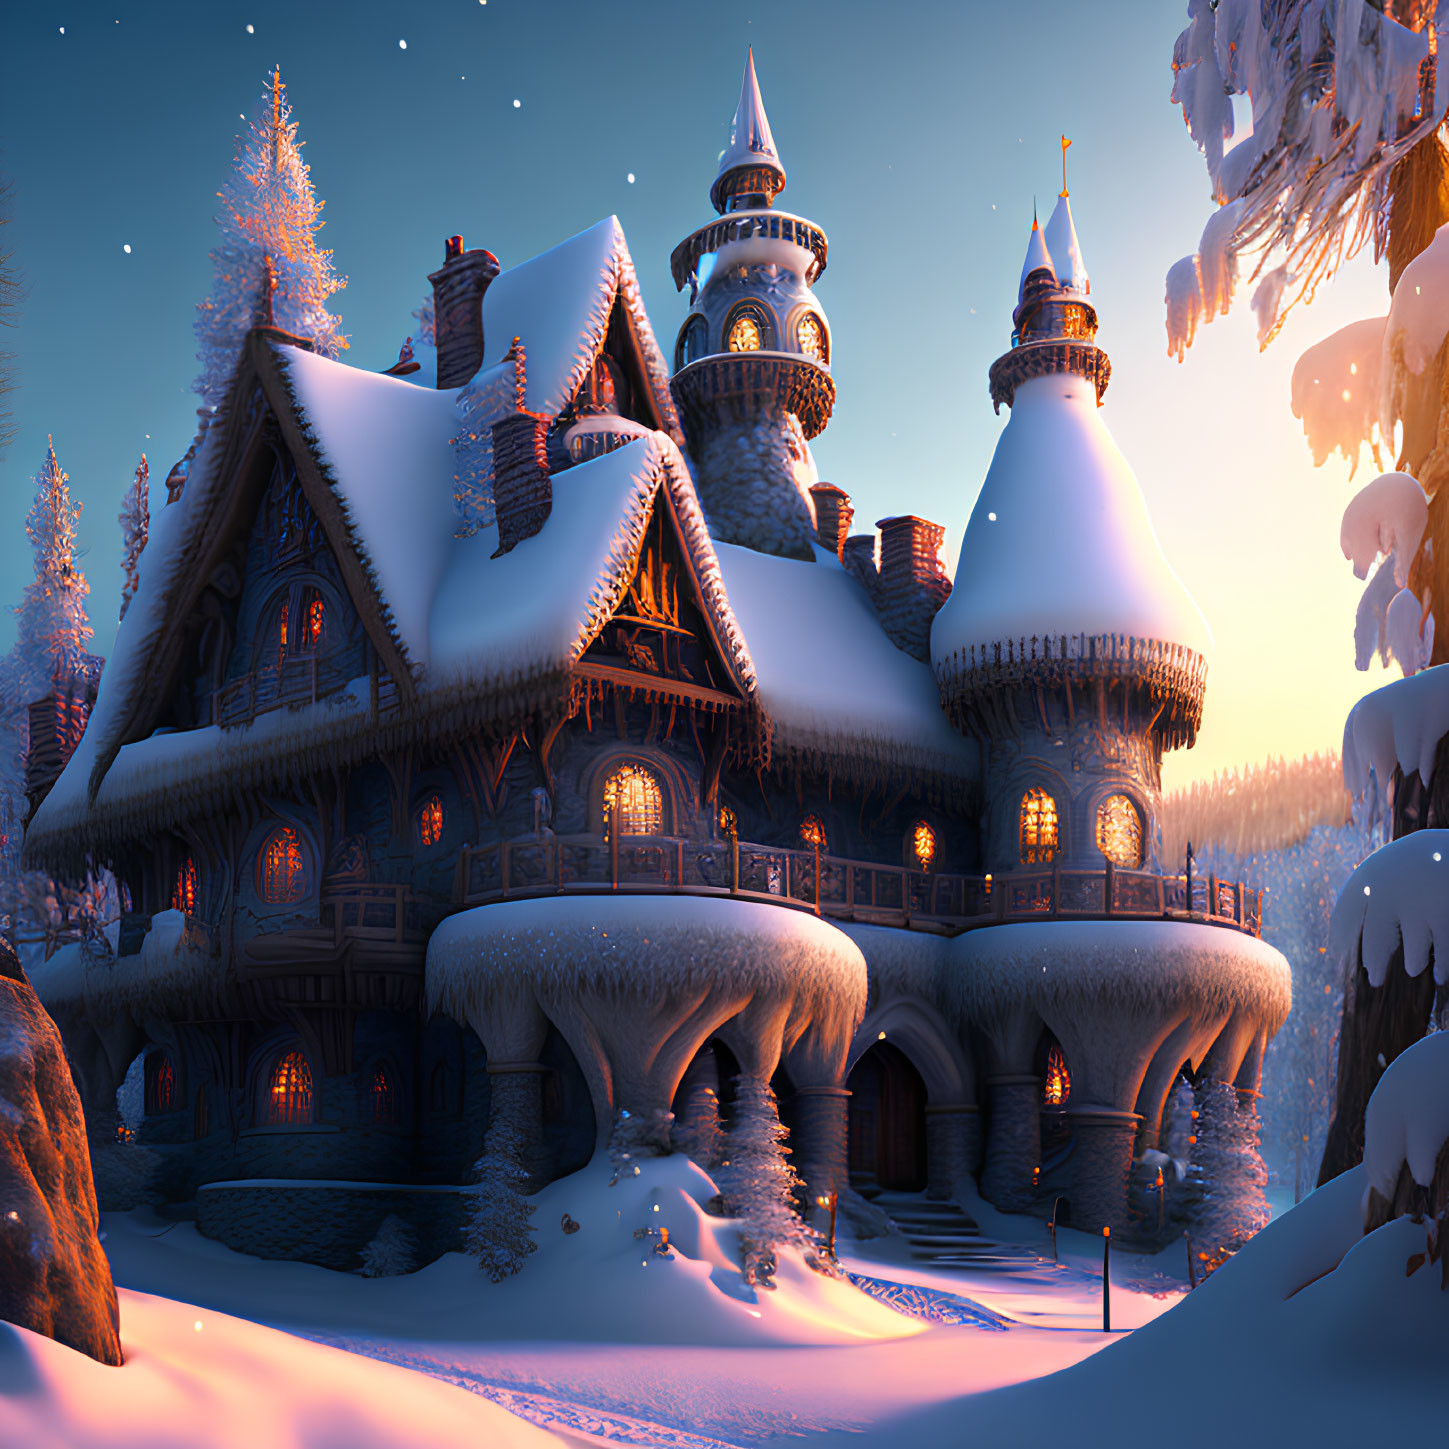 Snow-covered cottage with tall towers in tranquil snowy forest at dusk